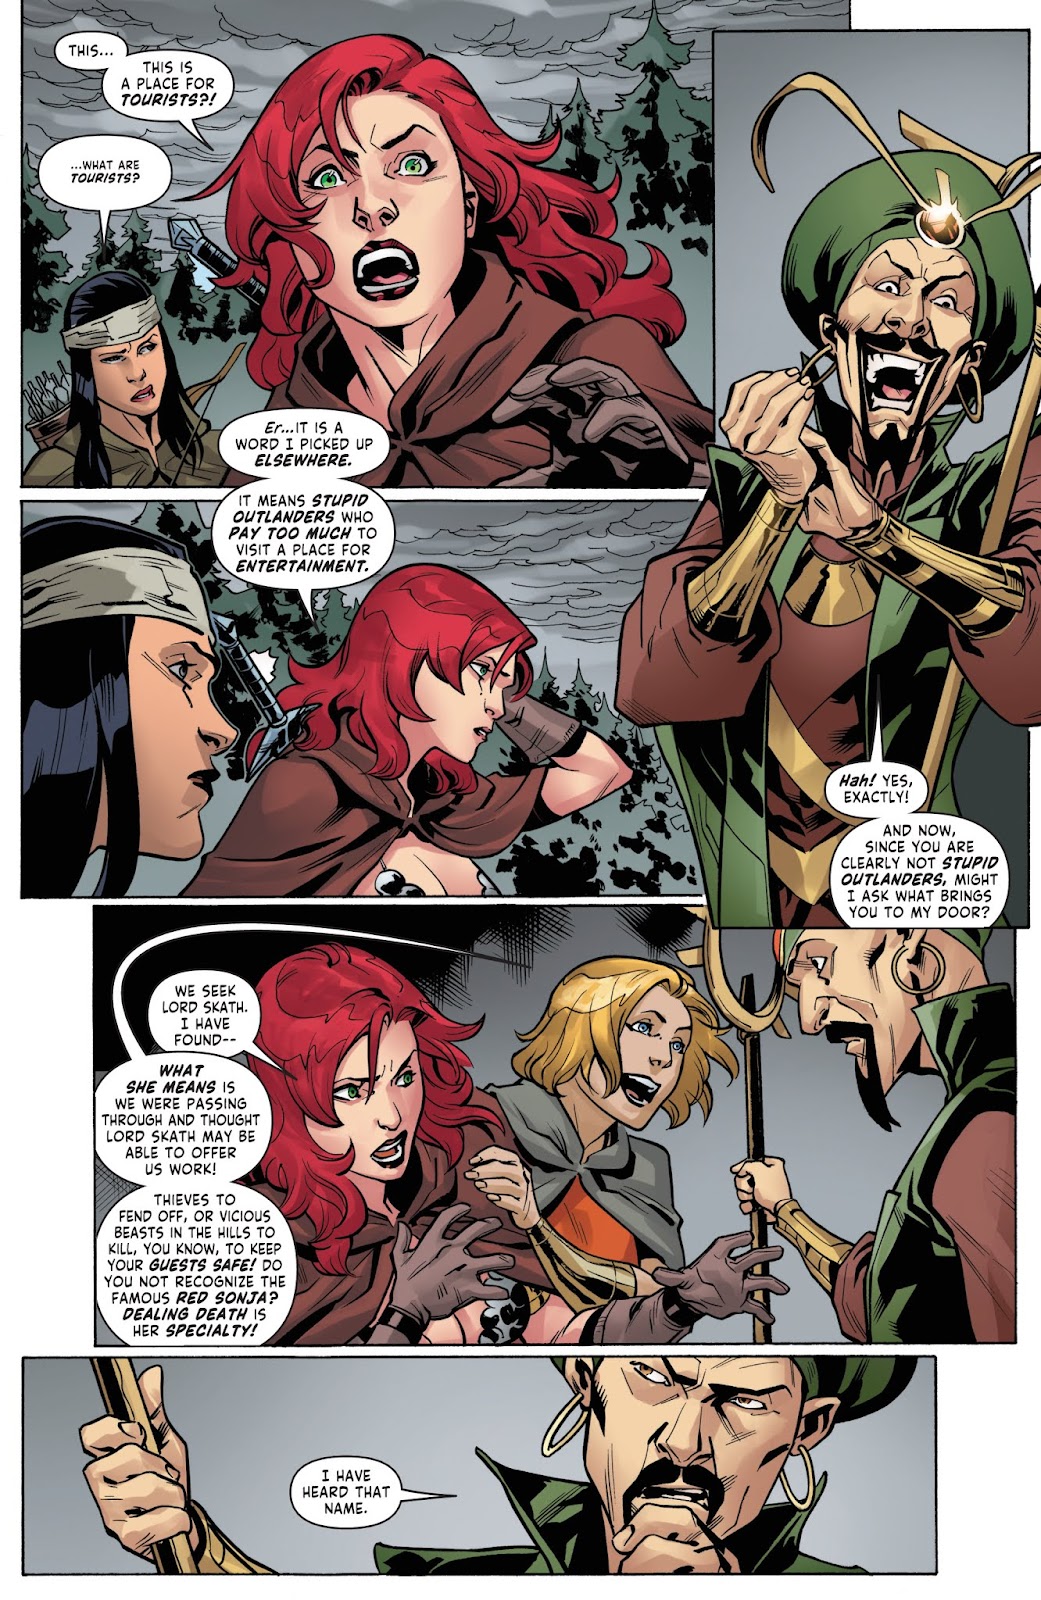 Red Sonja Vol. 4 issue 18 - Page 22